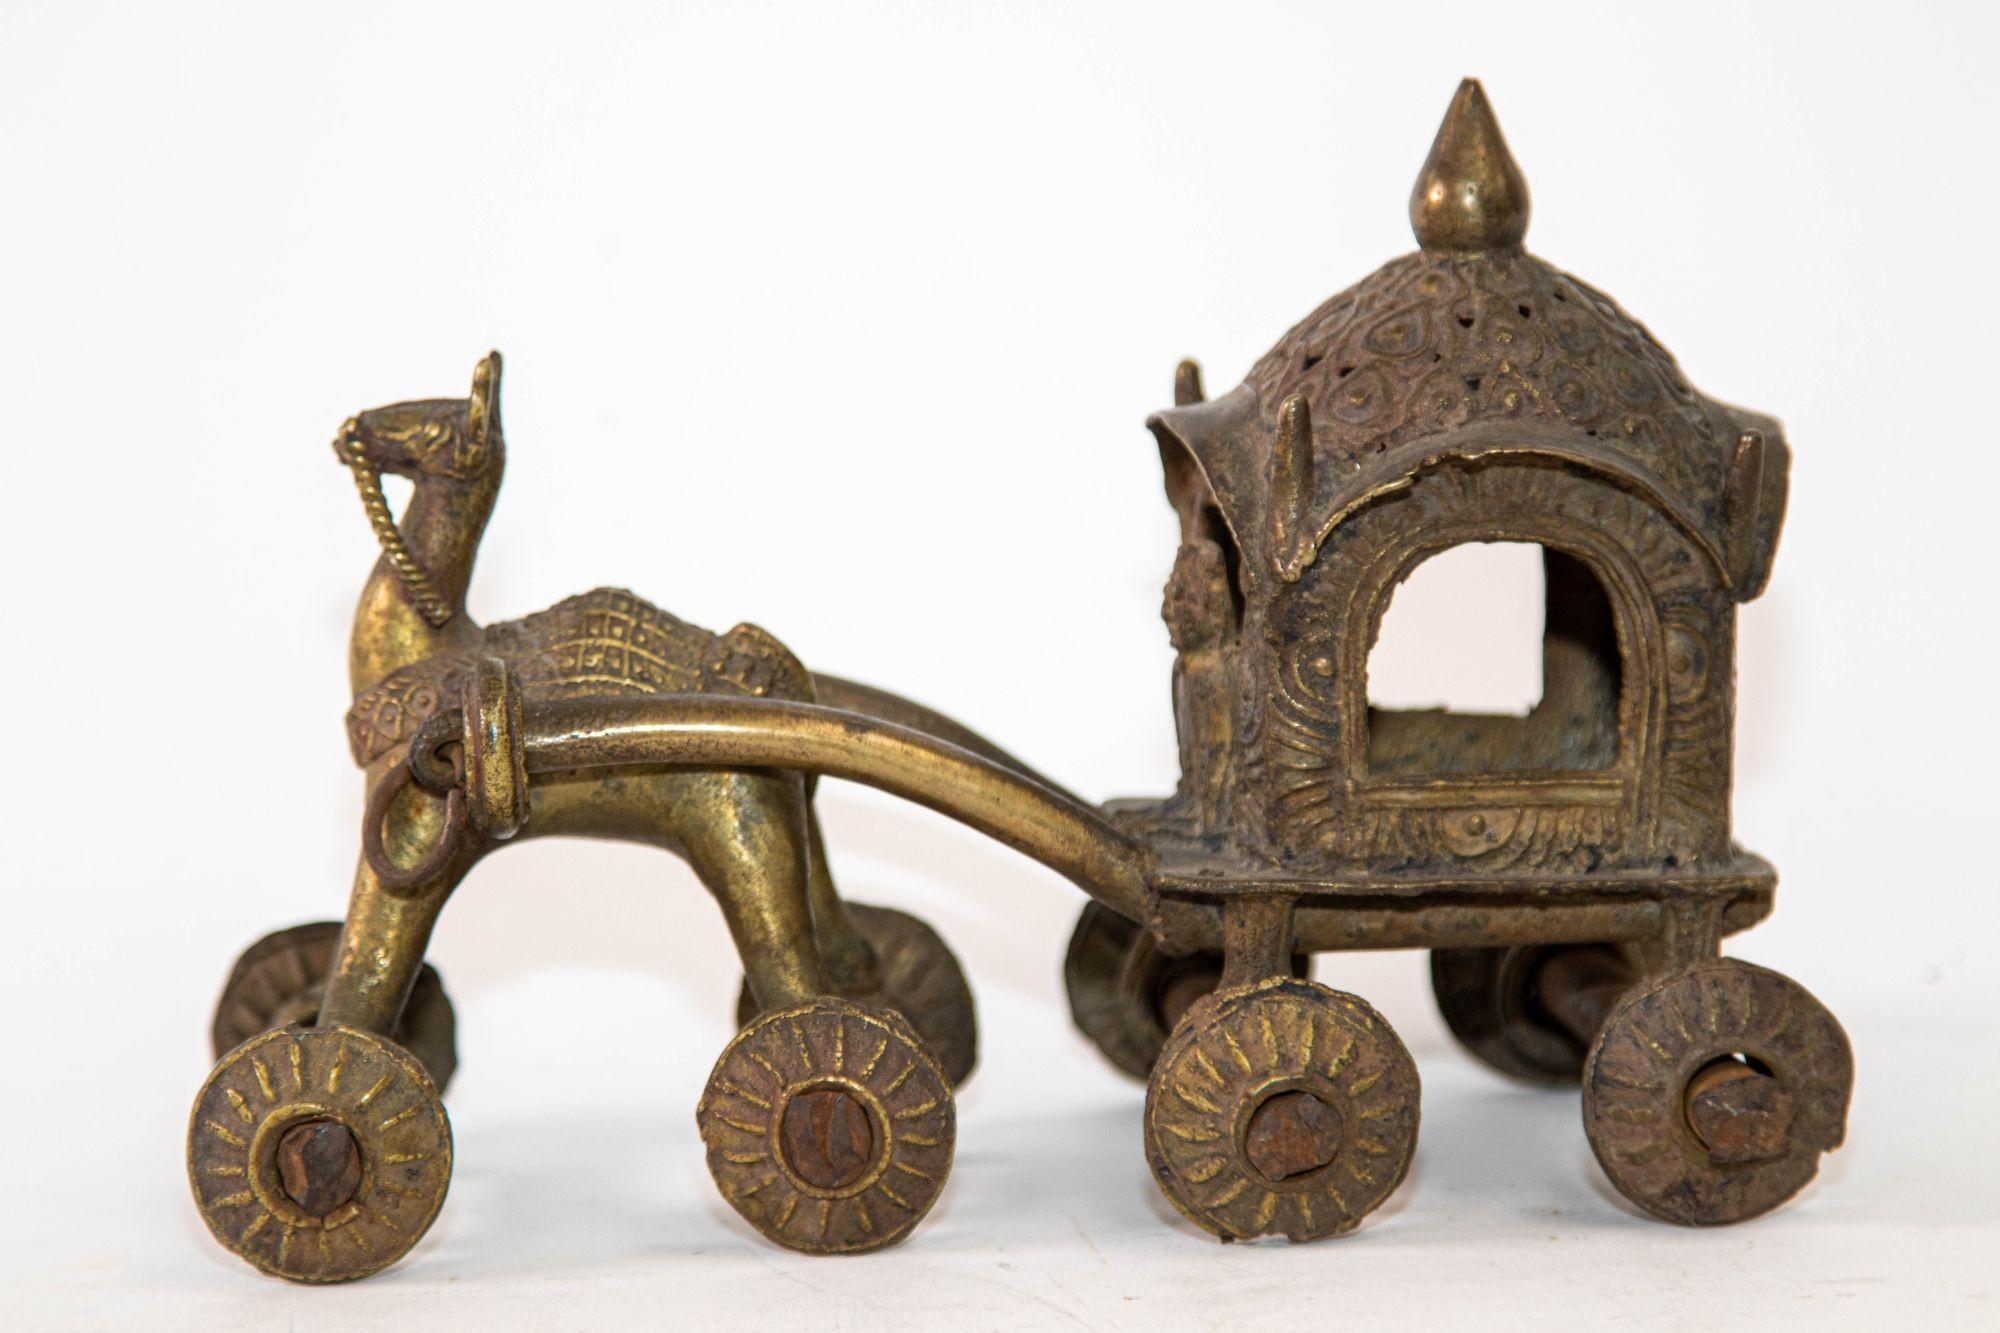 Antique hindu bronze Temple horse and chariot statue toy on wheels.
This collectible bronze temple toy horse is heavy and the sculptural details are full of artisanal charm and irregularities.
The wheels turn independently of the iron axles, and it